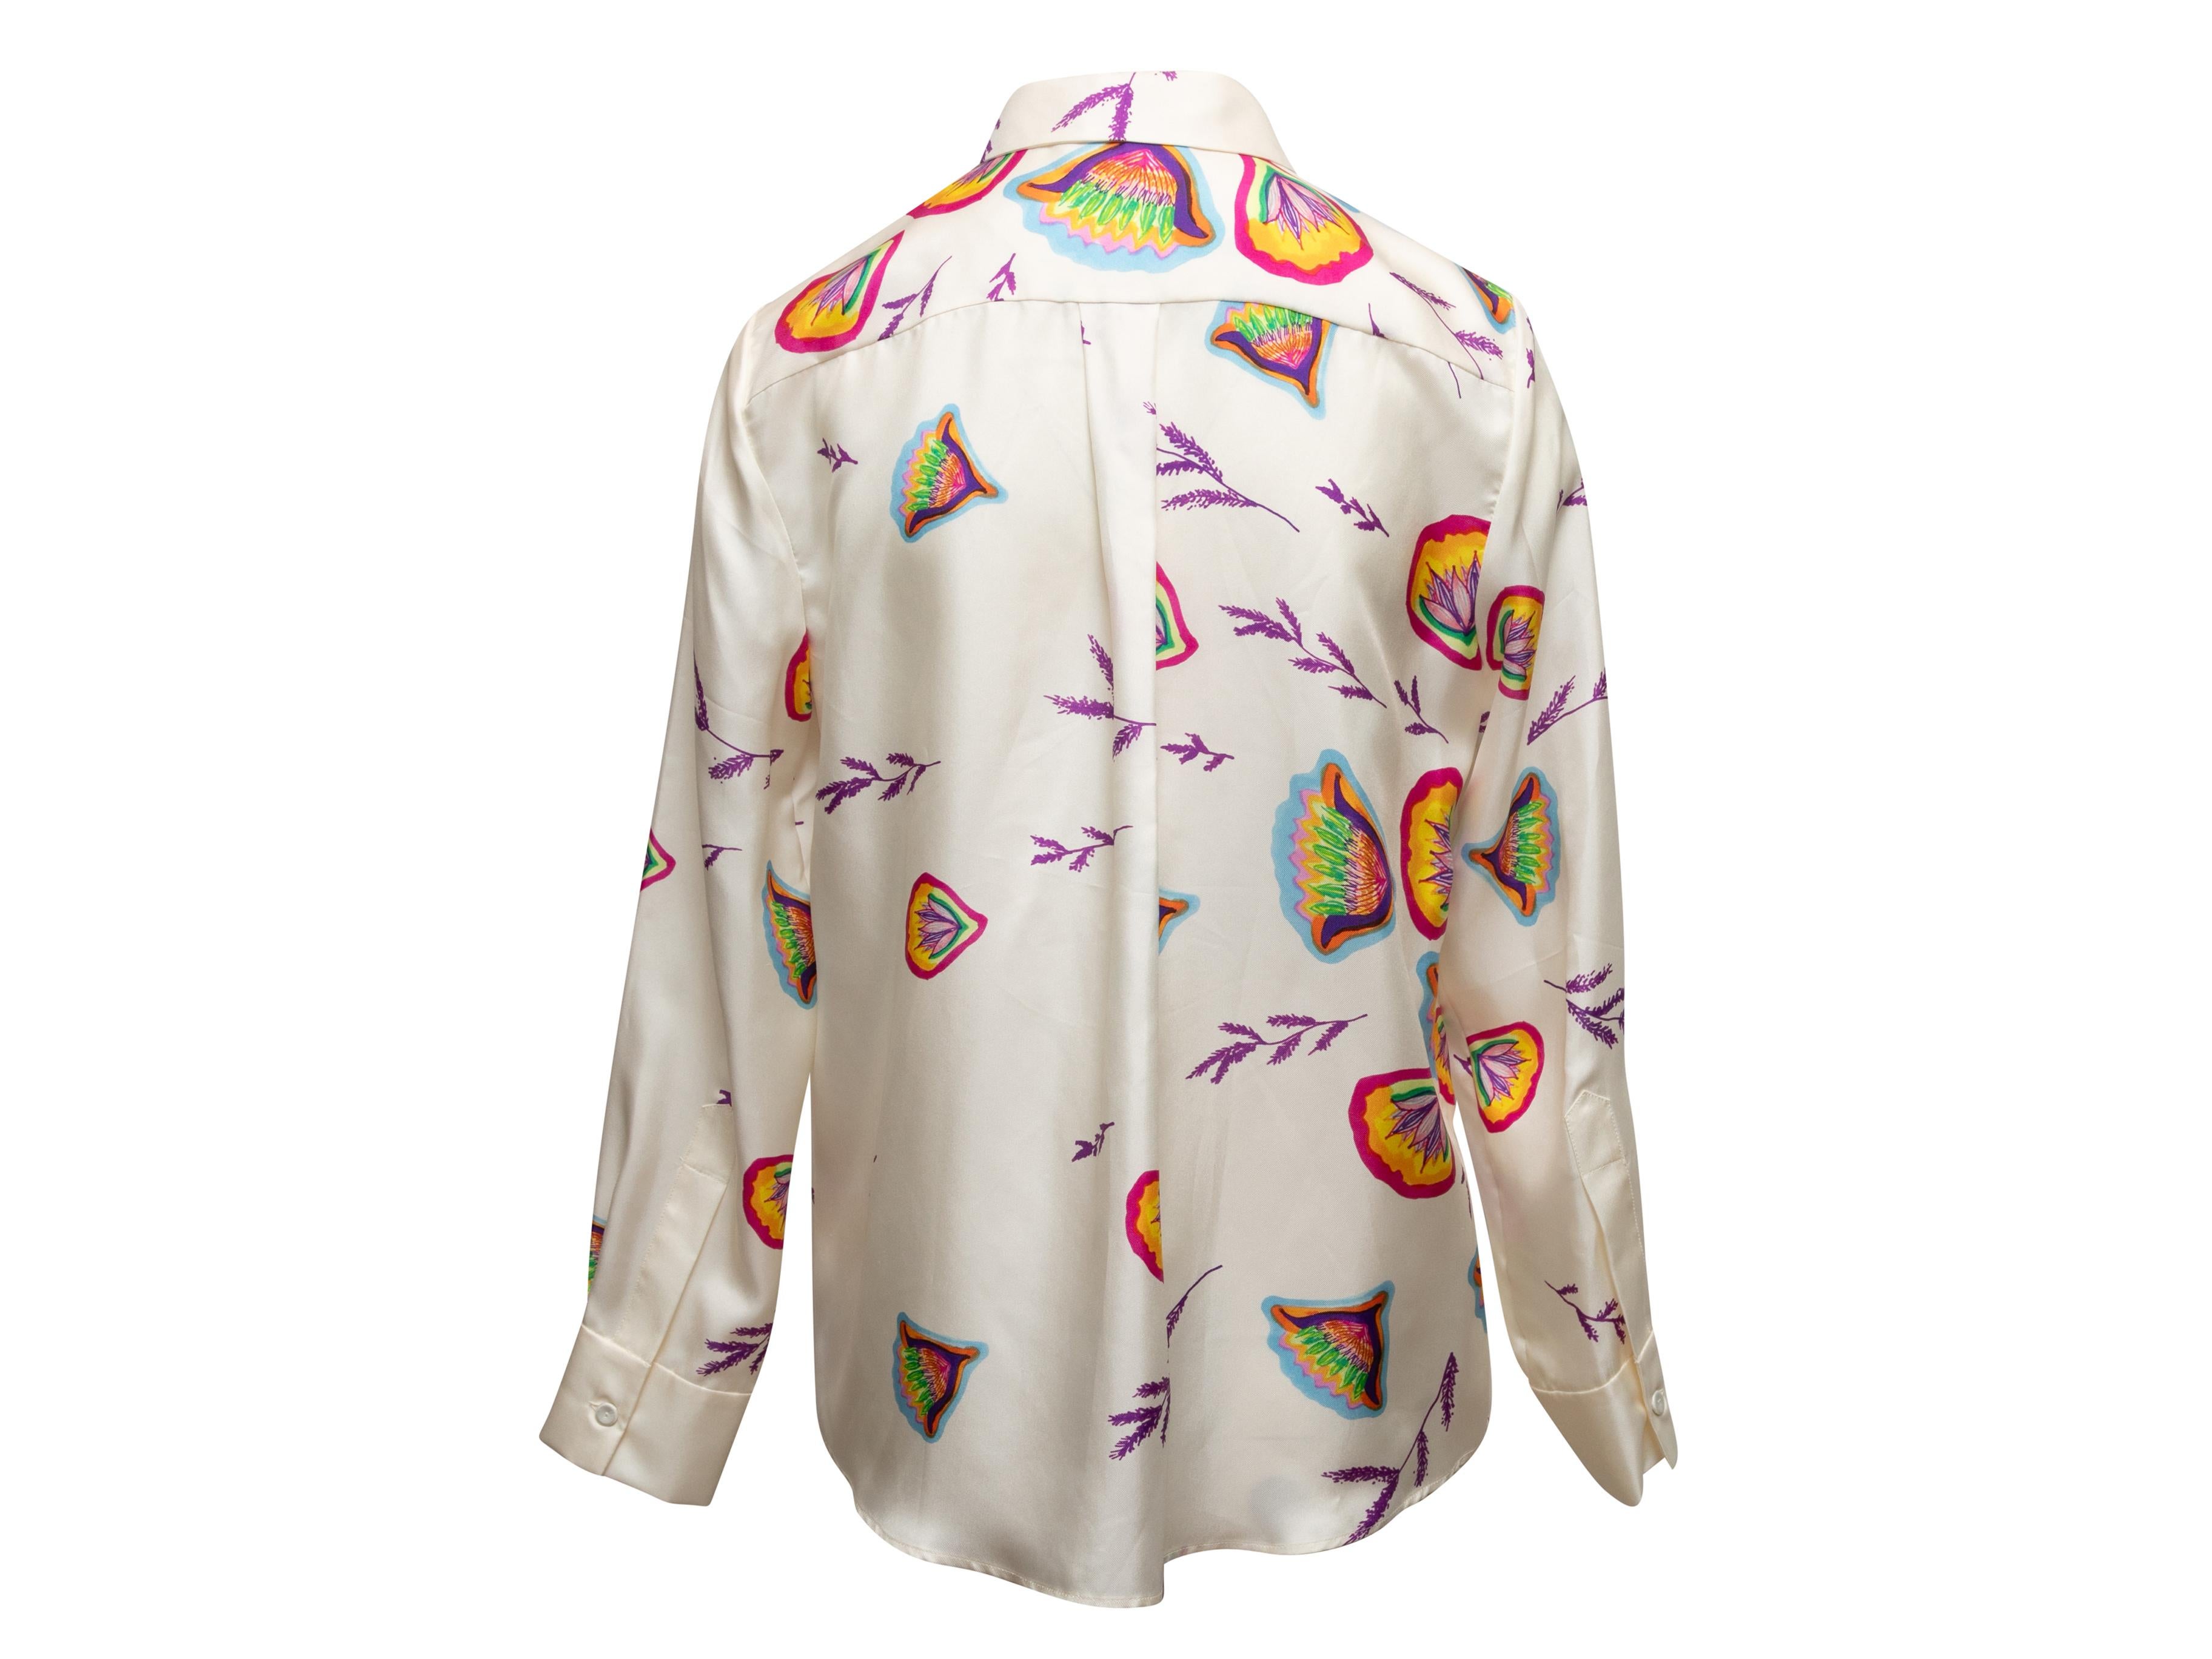 White and multicolor silk floral print long sleeve button-up top by Gabriela Hearst. Pointed collar. Button closures at front. Designer size 42. 34